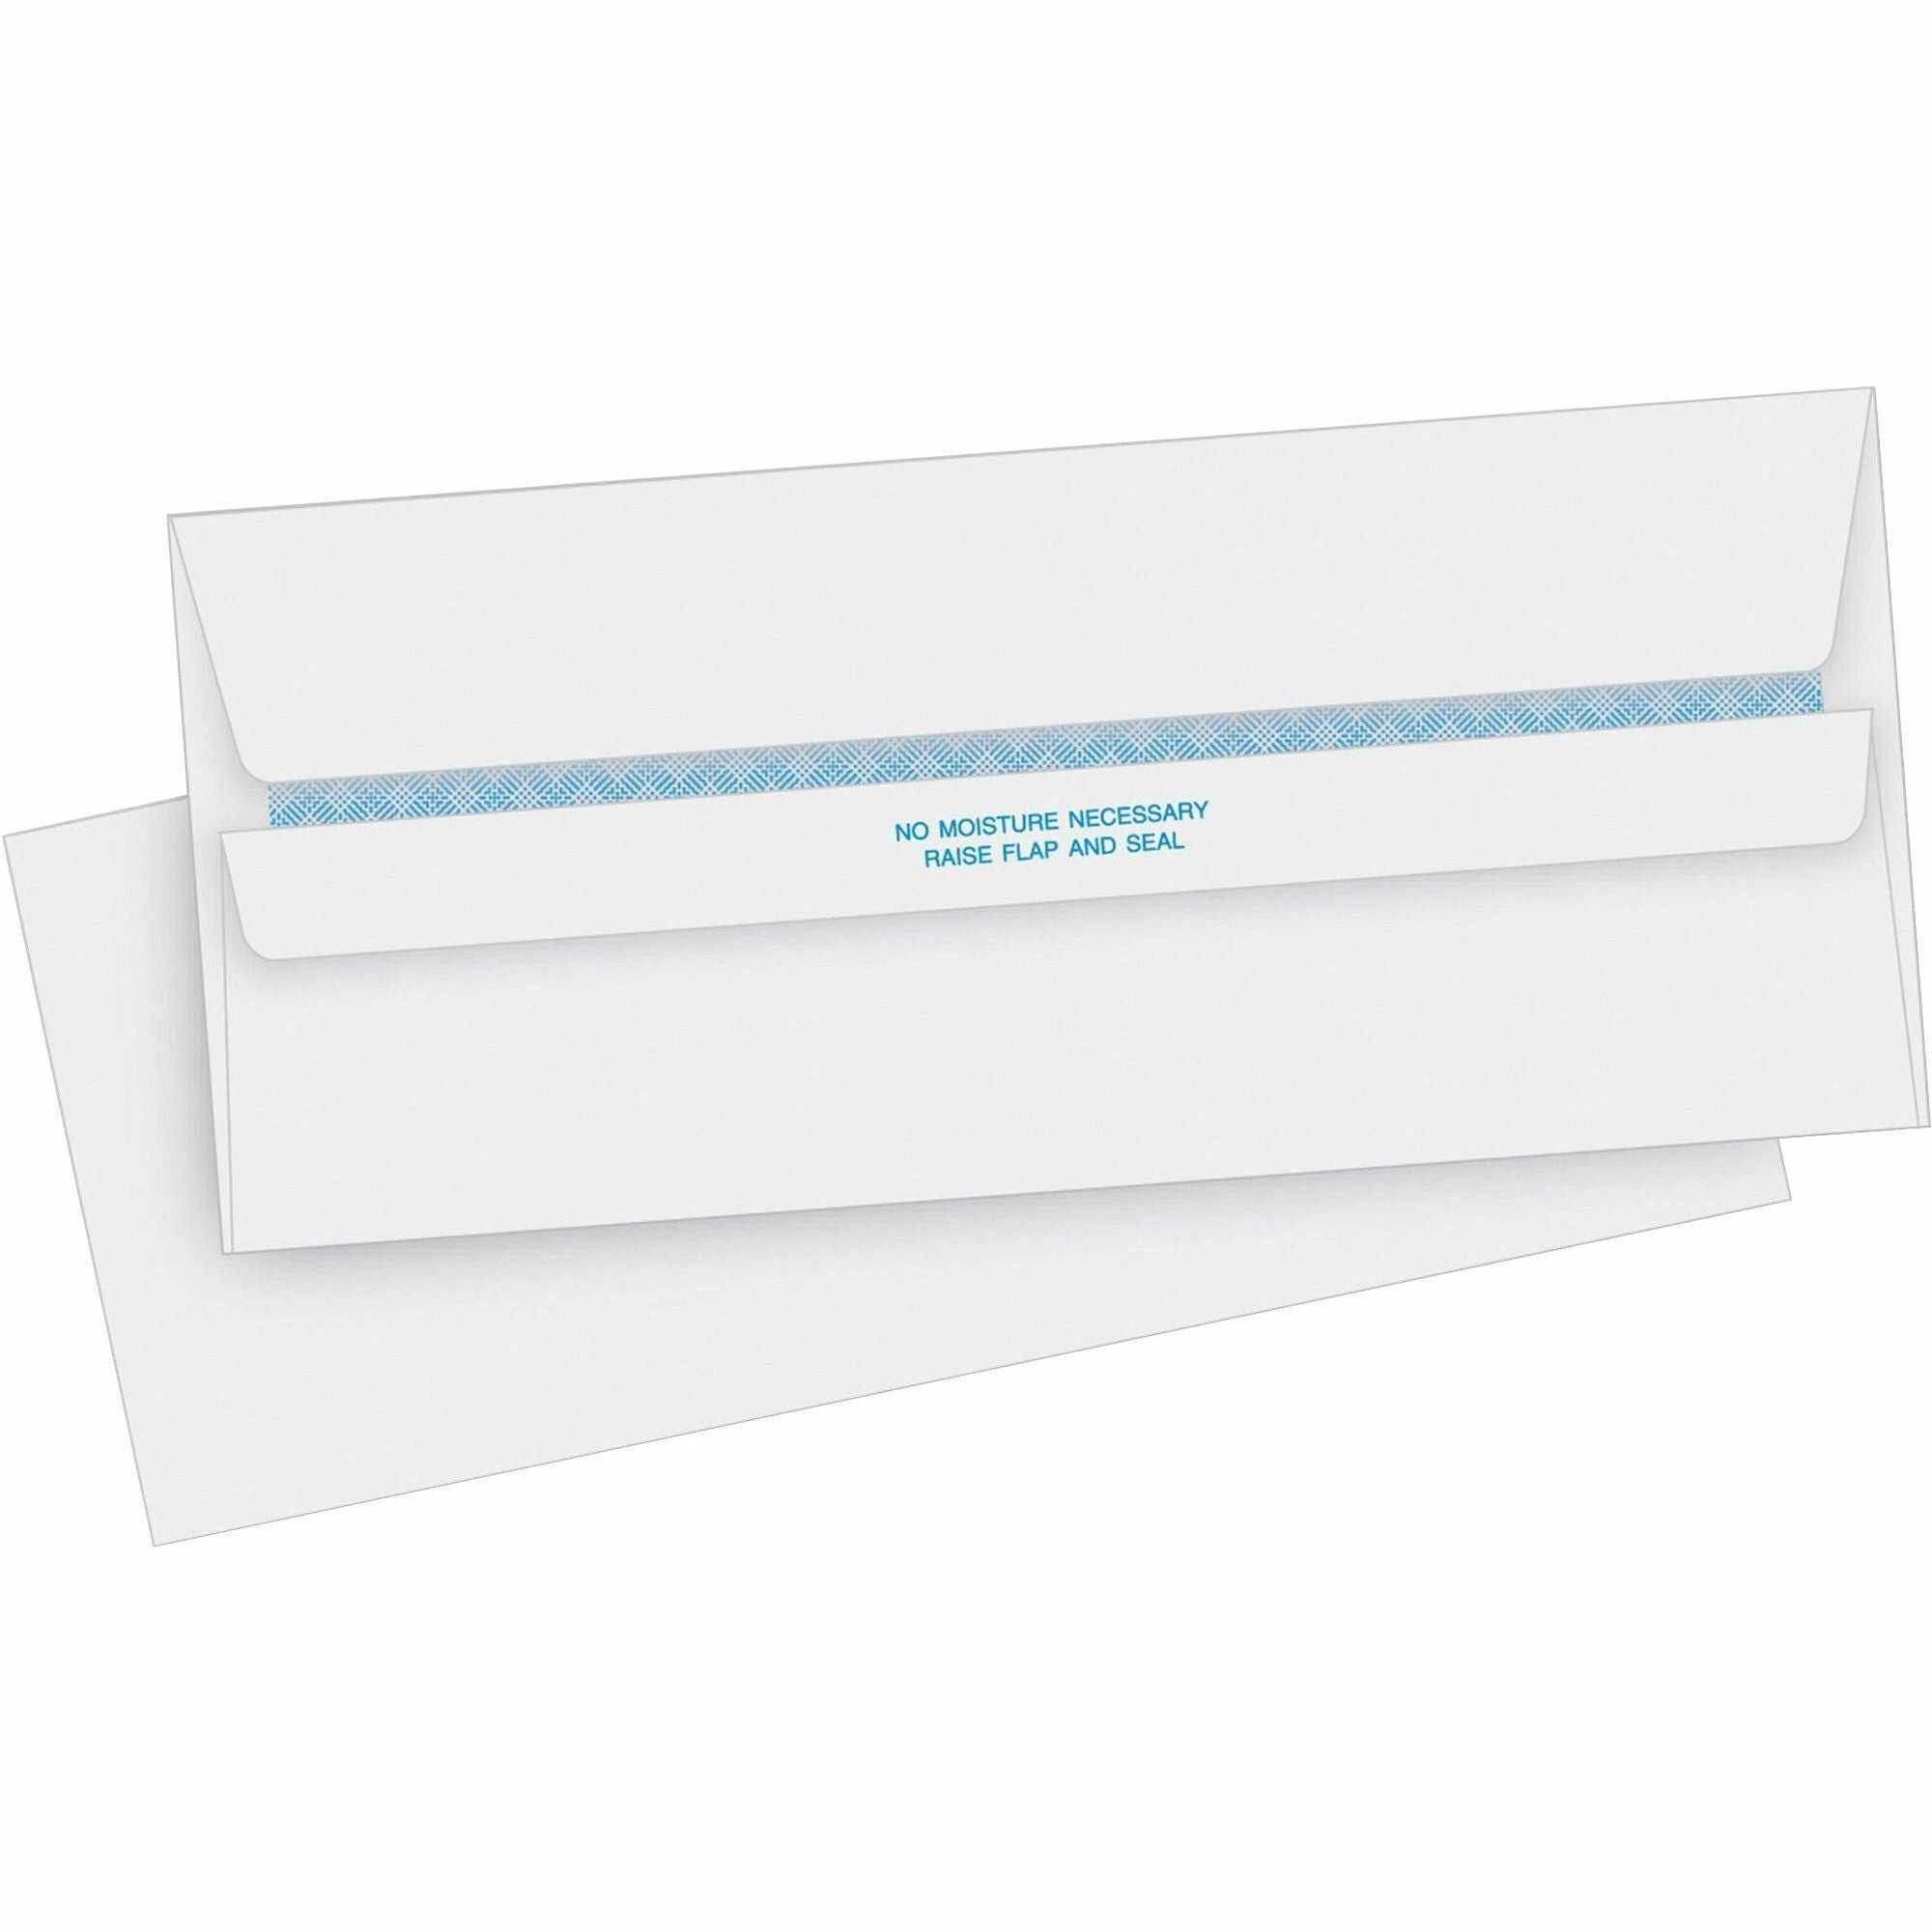 Business Source Regular Security Invoice Envelopes - Business - #10 - 4 1/8" Width x 9 1/2" Length - 24 lb - Self-sealing - 500 / Box - White - 